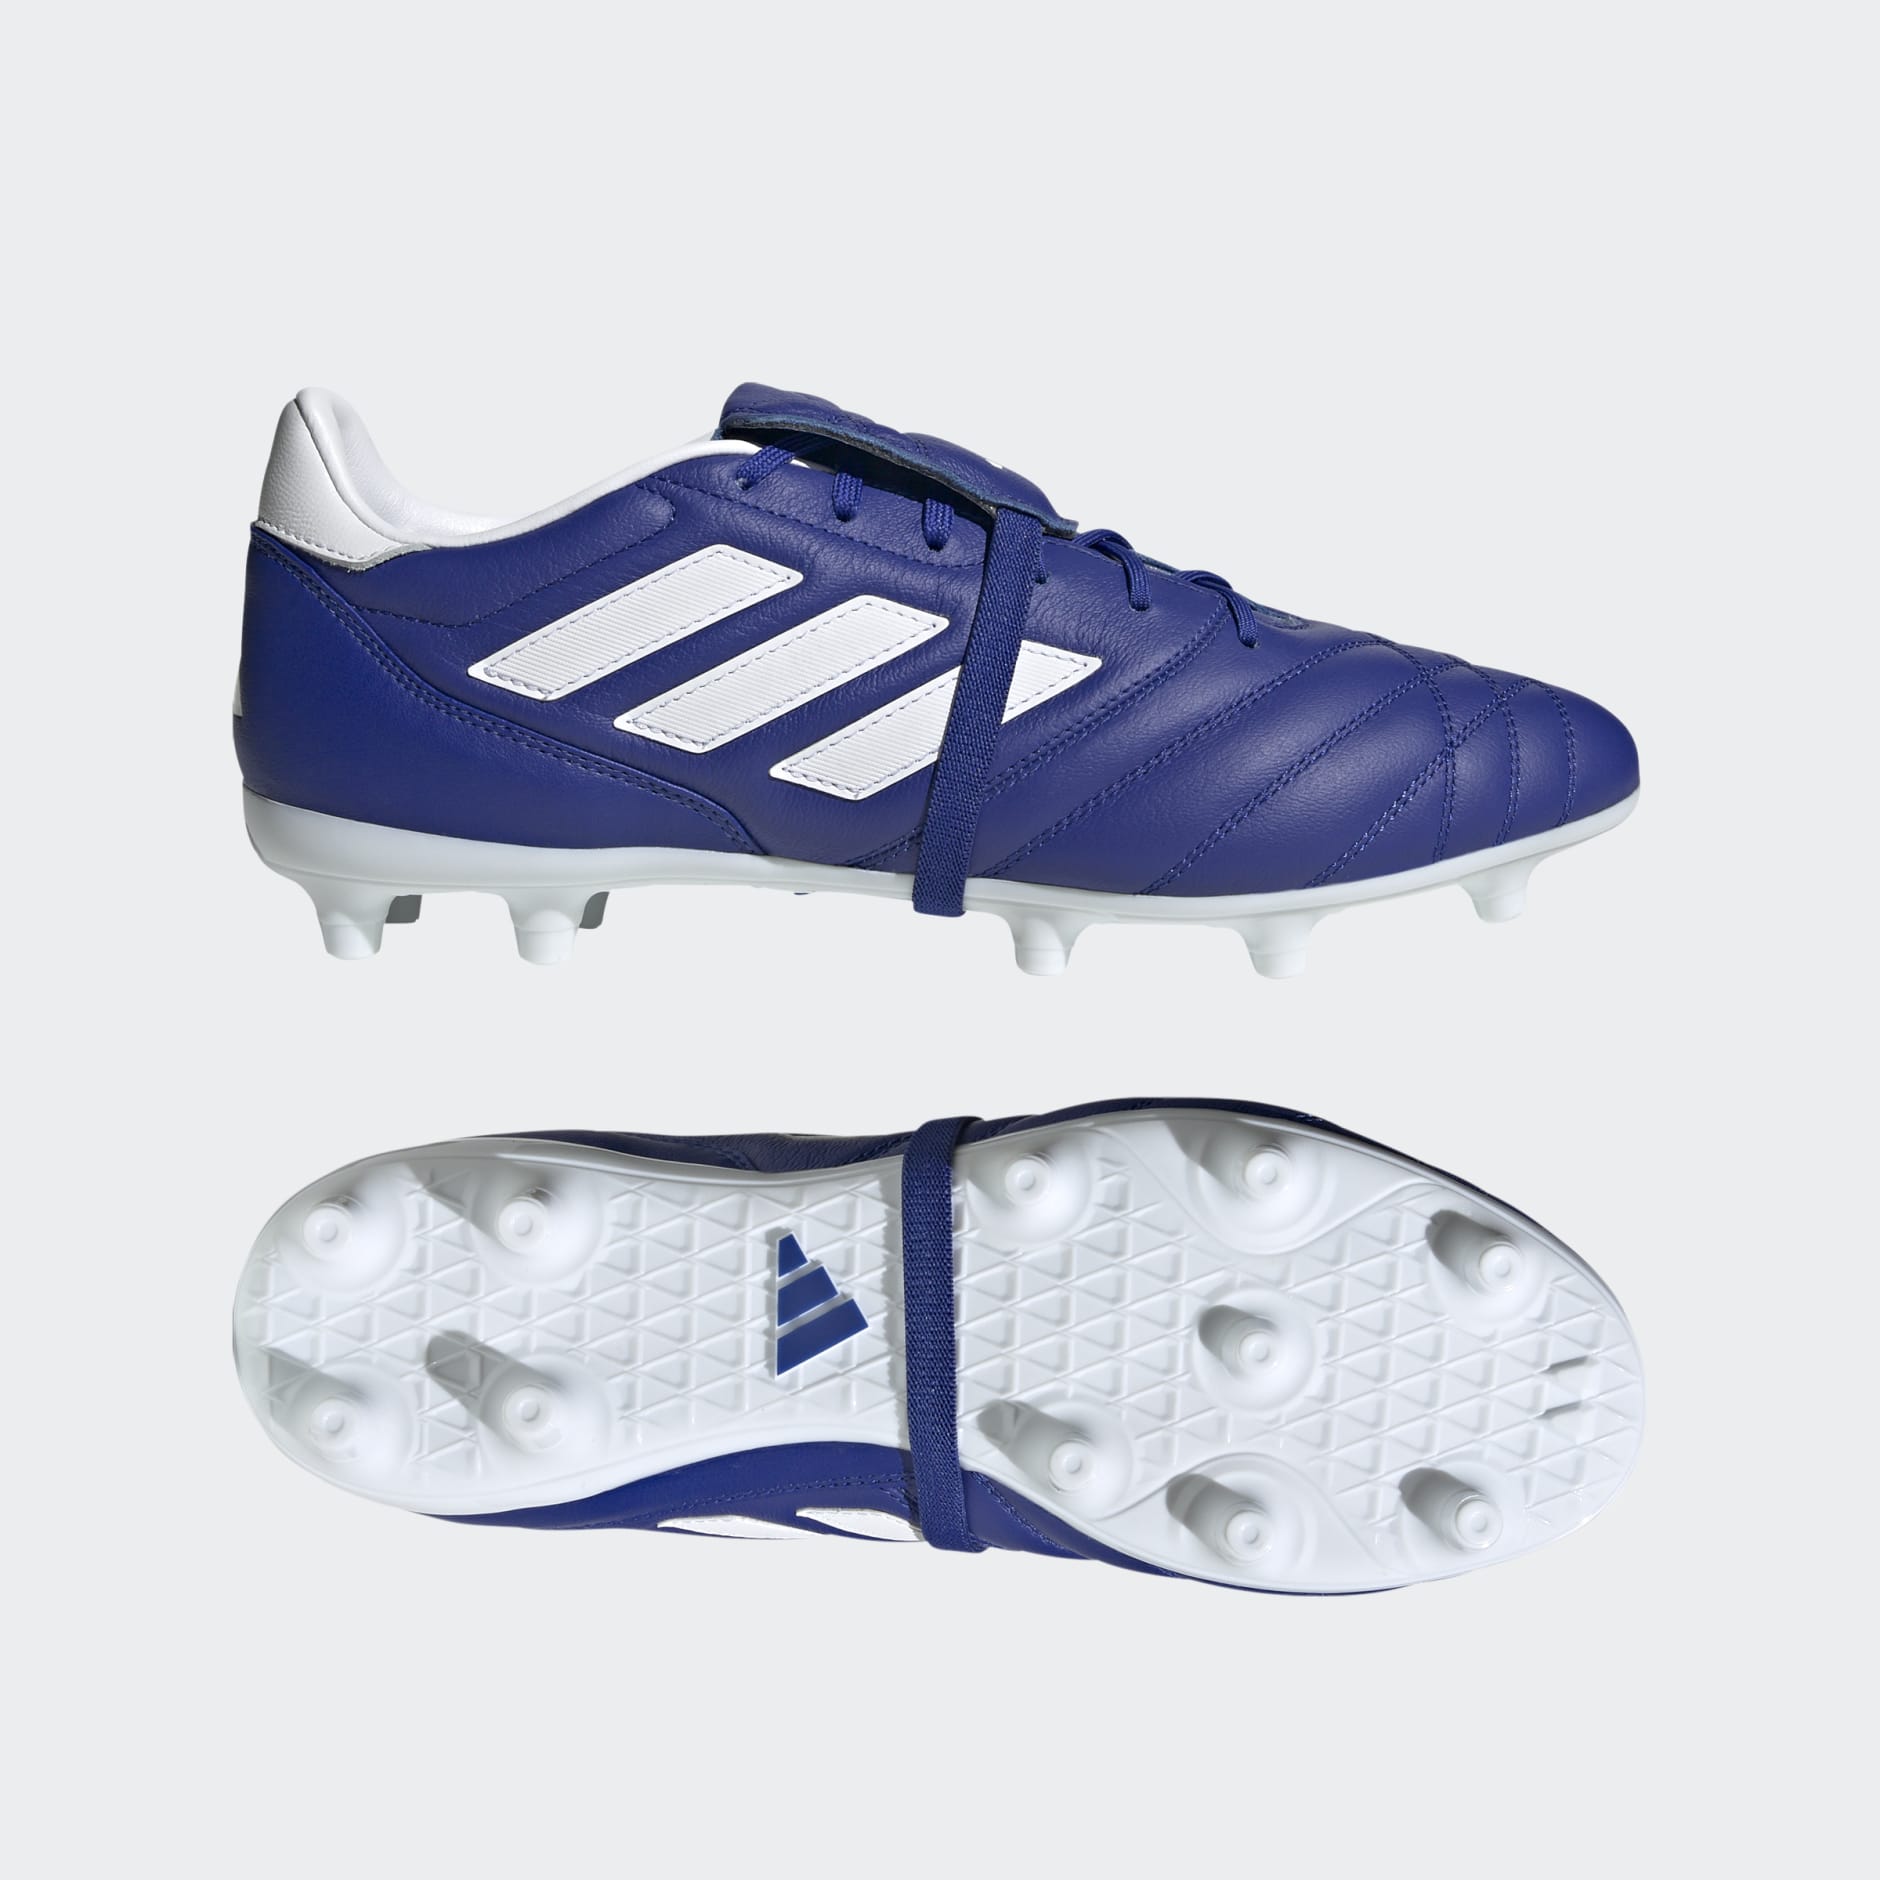 Copa Firm Ground Boots - Blue adidas